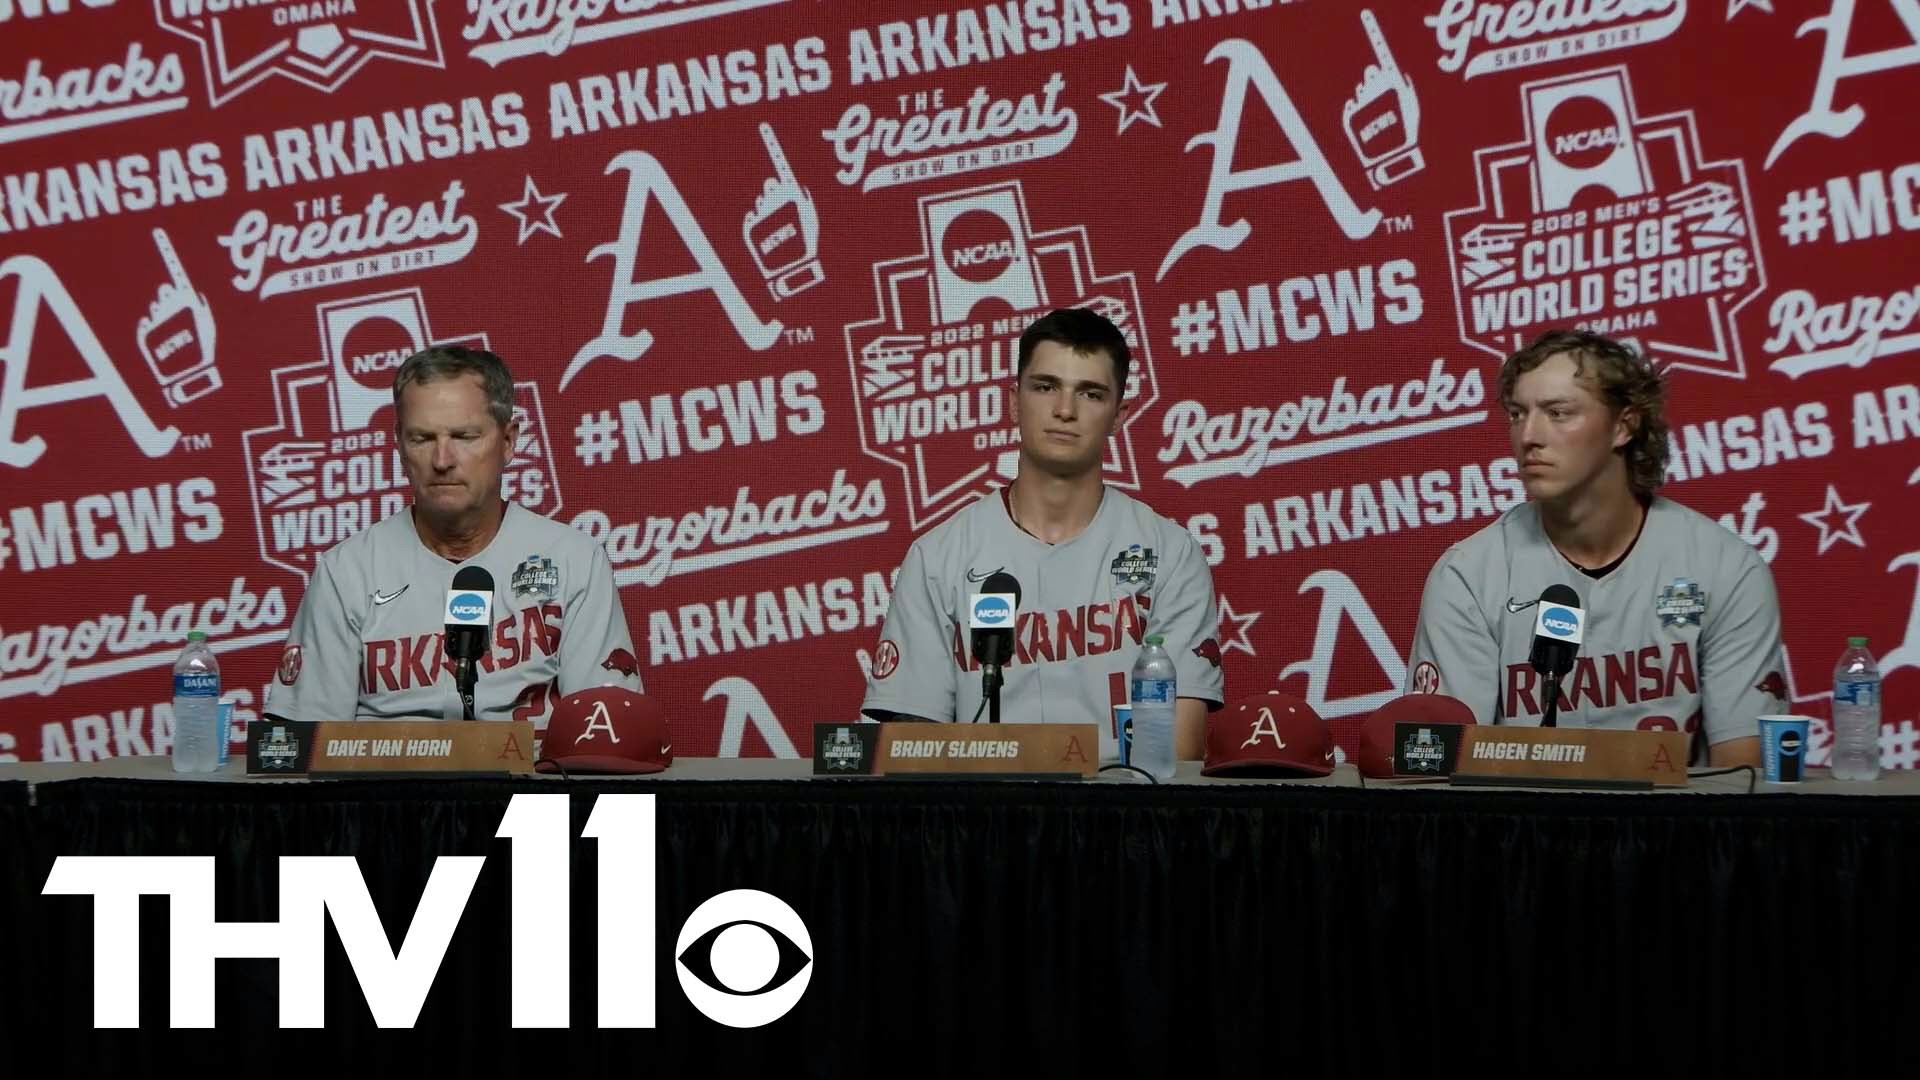 The Razorbacks speak postgame after their win against Ole Miss in the 2022 College World Series.